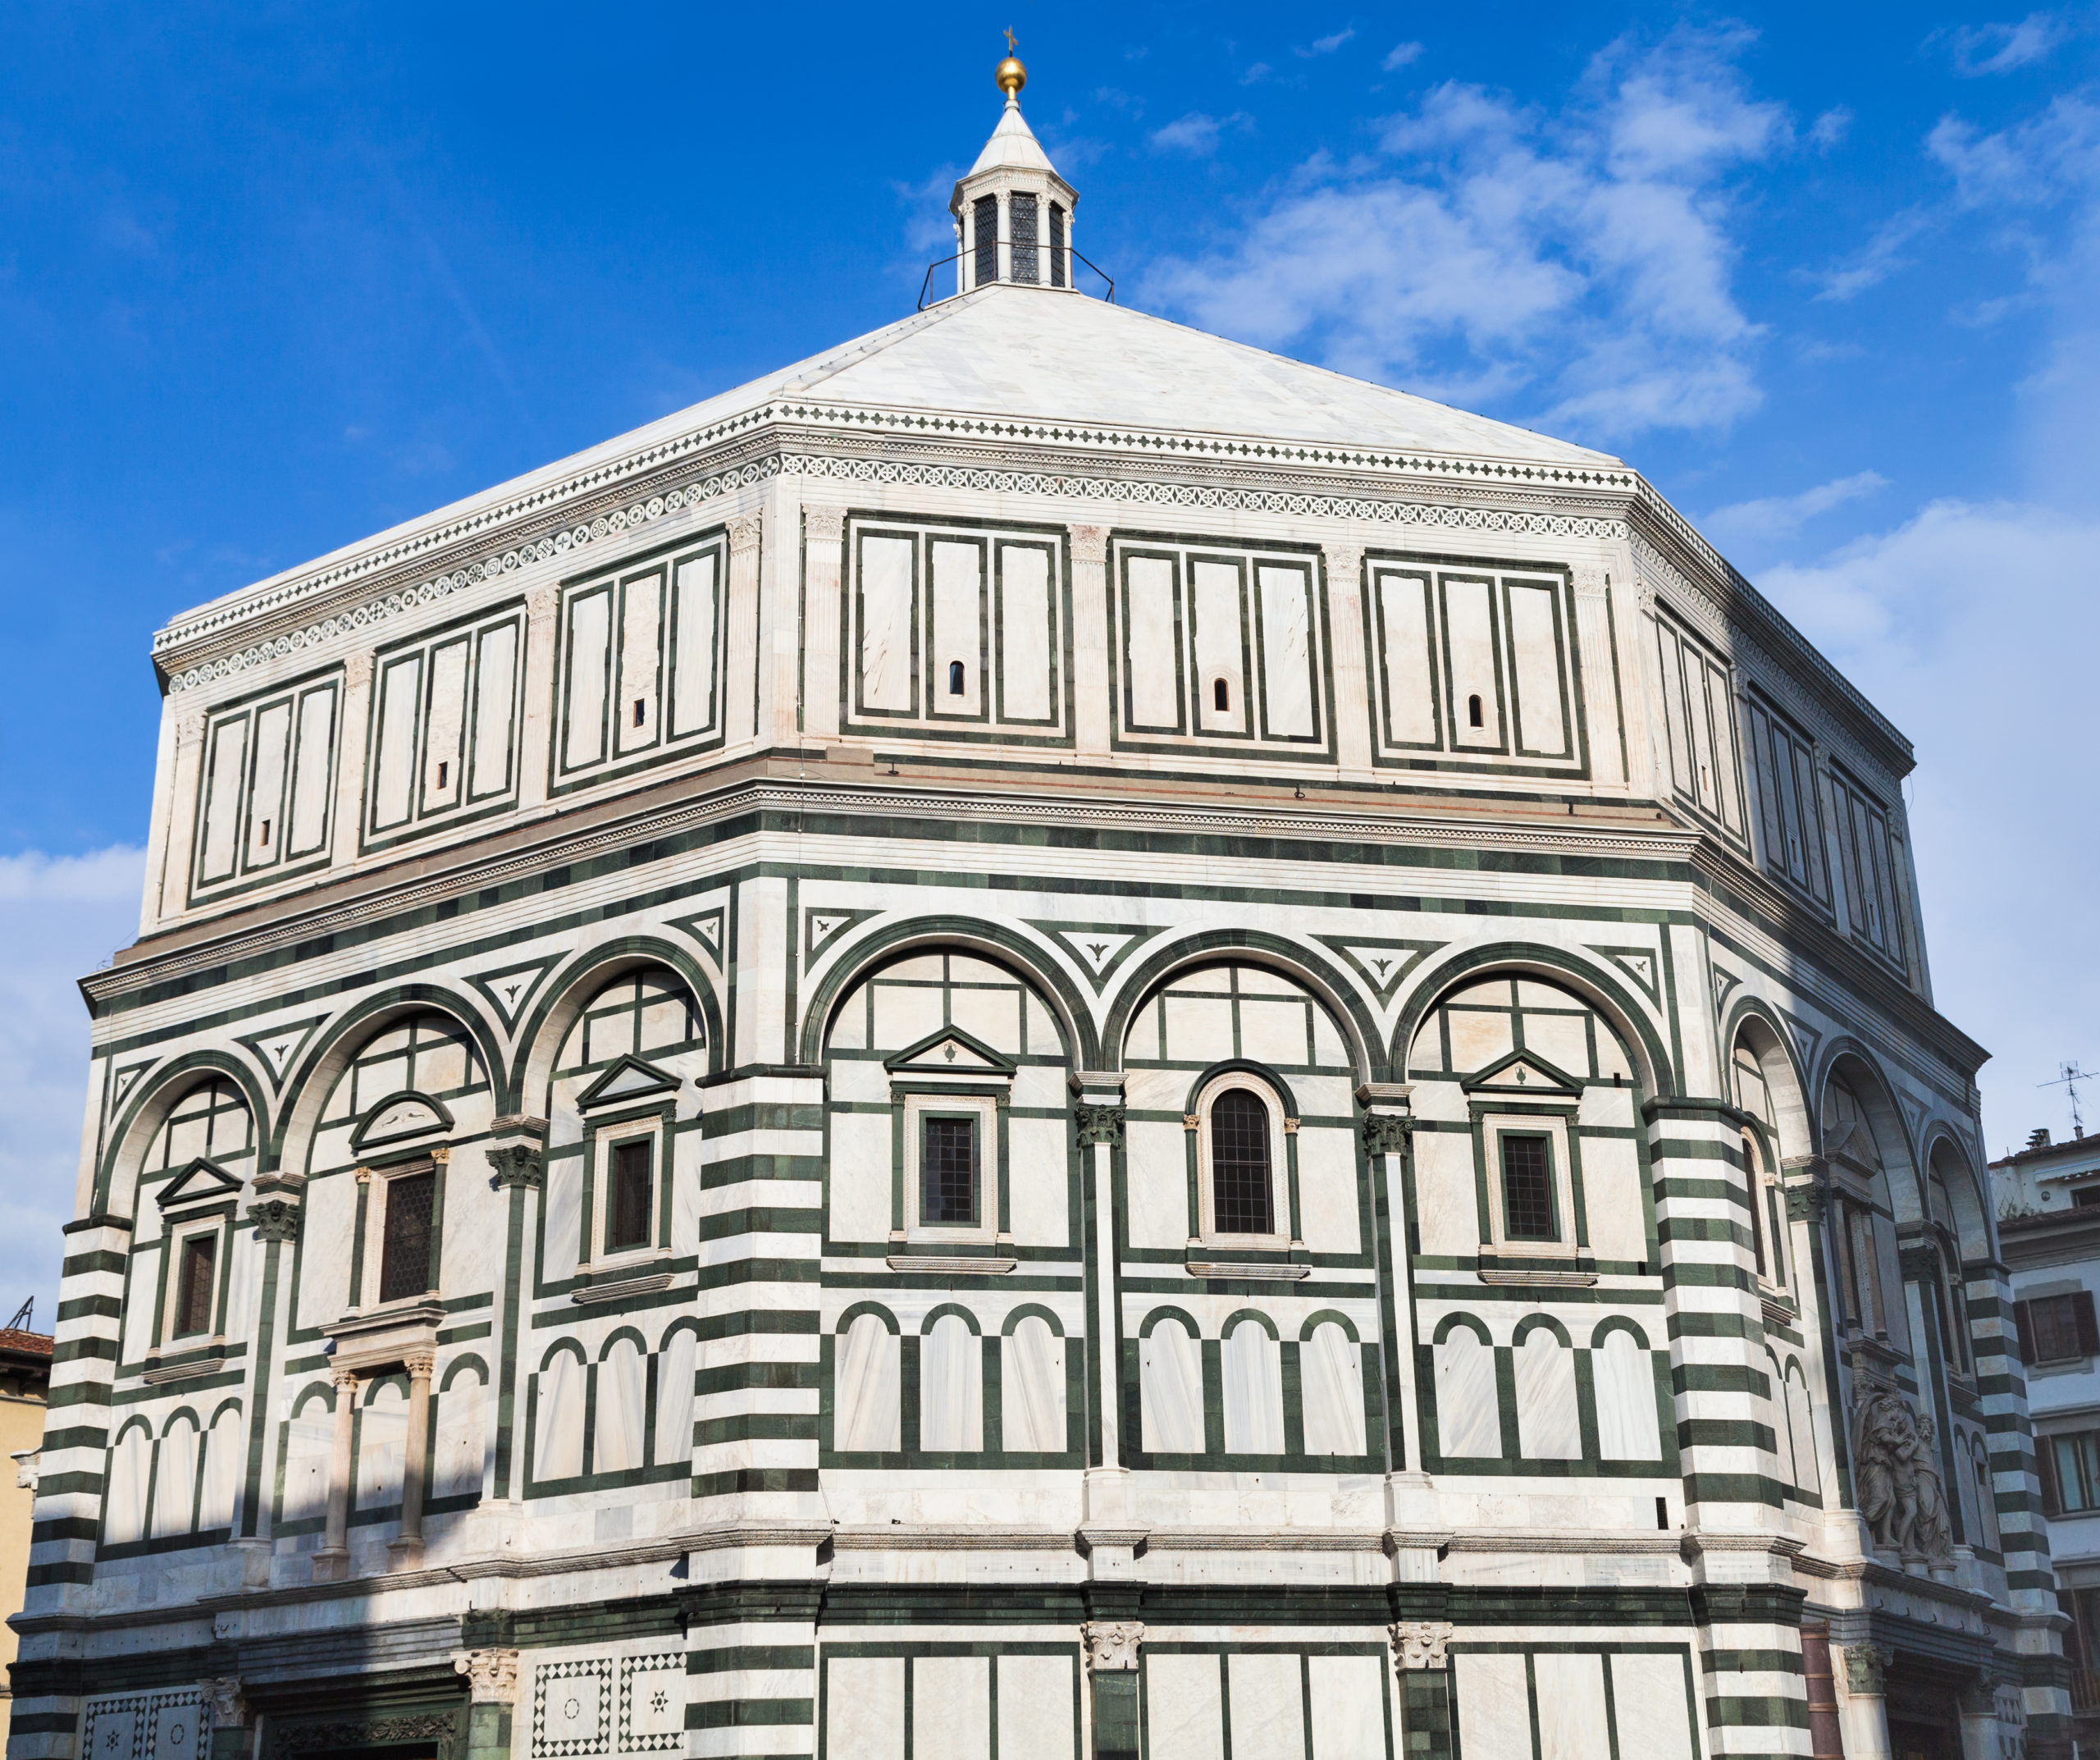 Things to Do in Florence